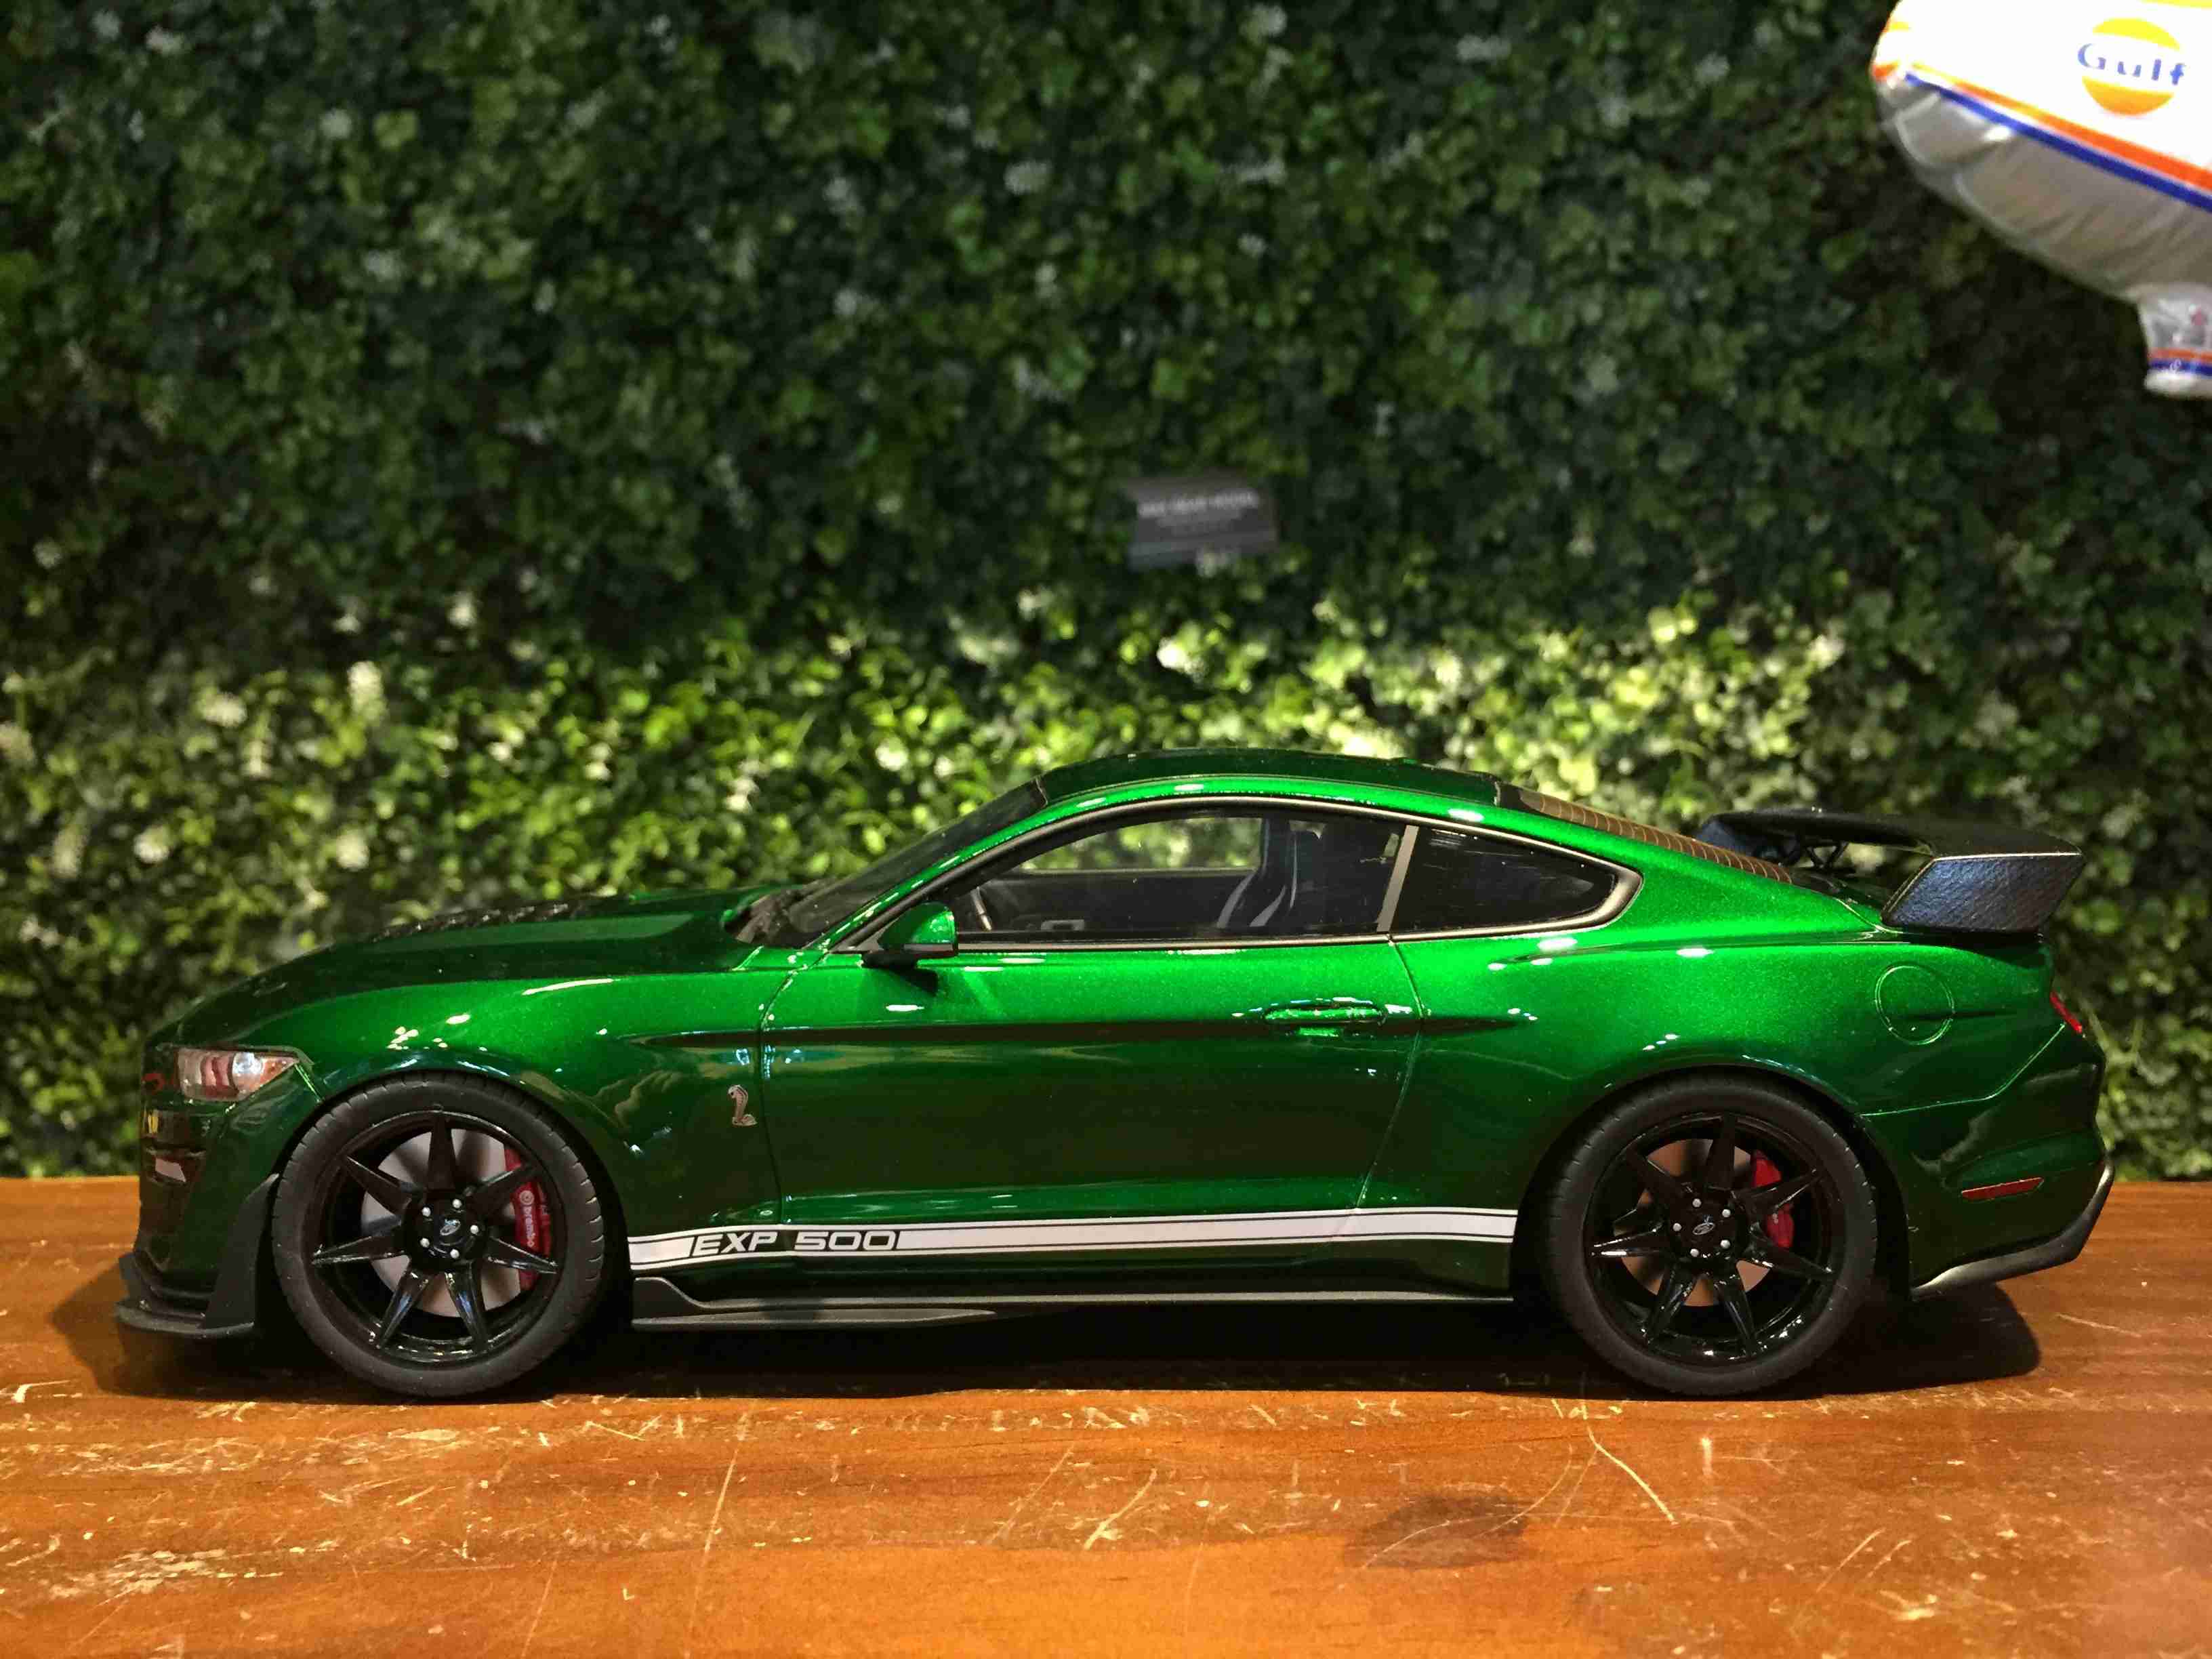 1/18 GT Spirit Ford Shelby Mustang GT500 2020 GT834【MGM】